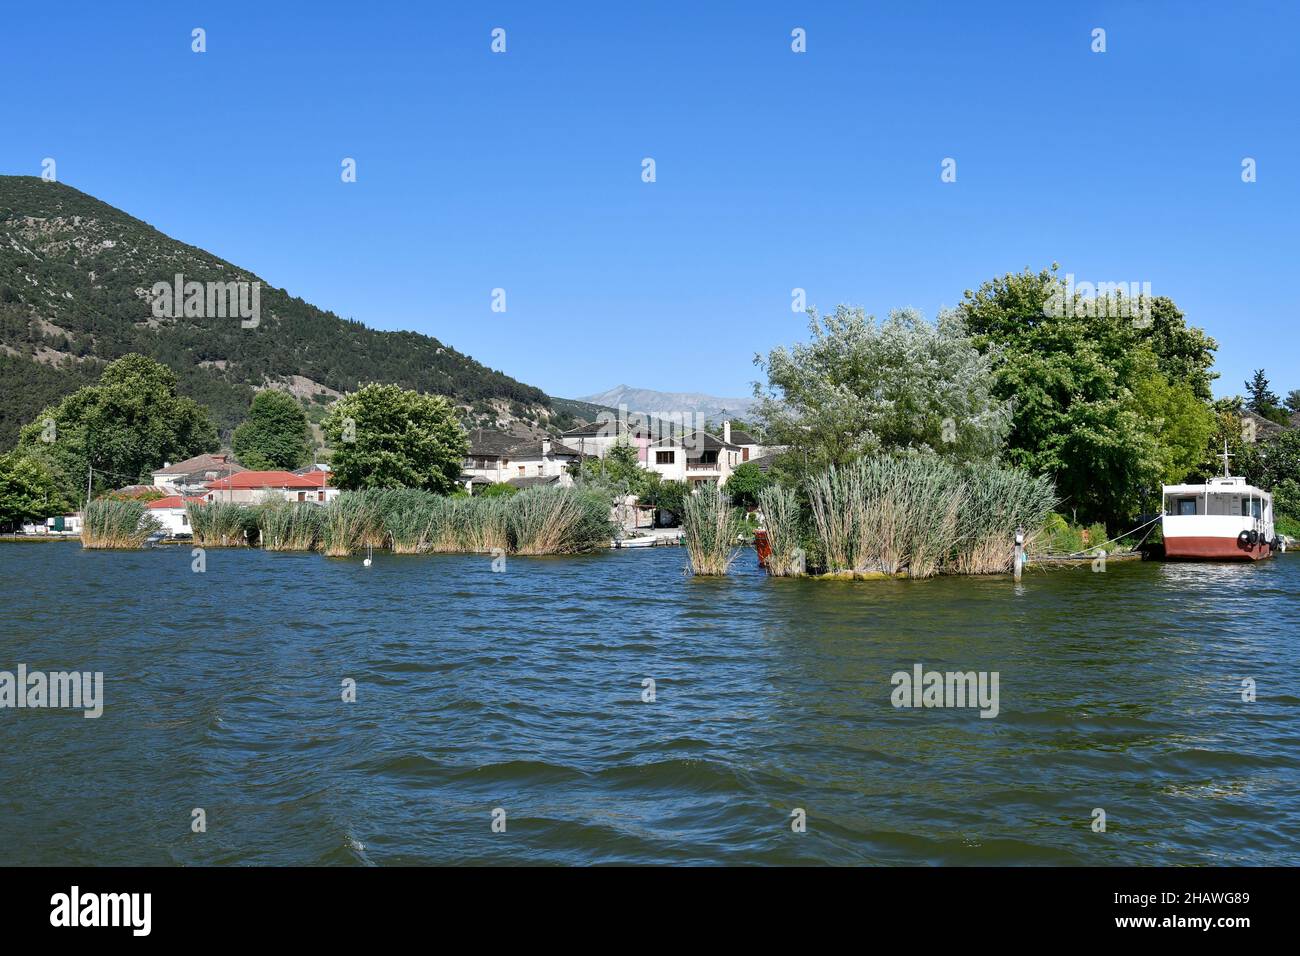 Greece, Ioannina, view to the settlement on small island in lake Pamvotida with Stock Photo